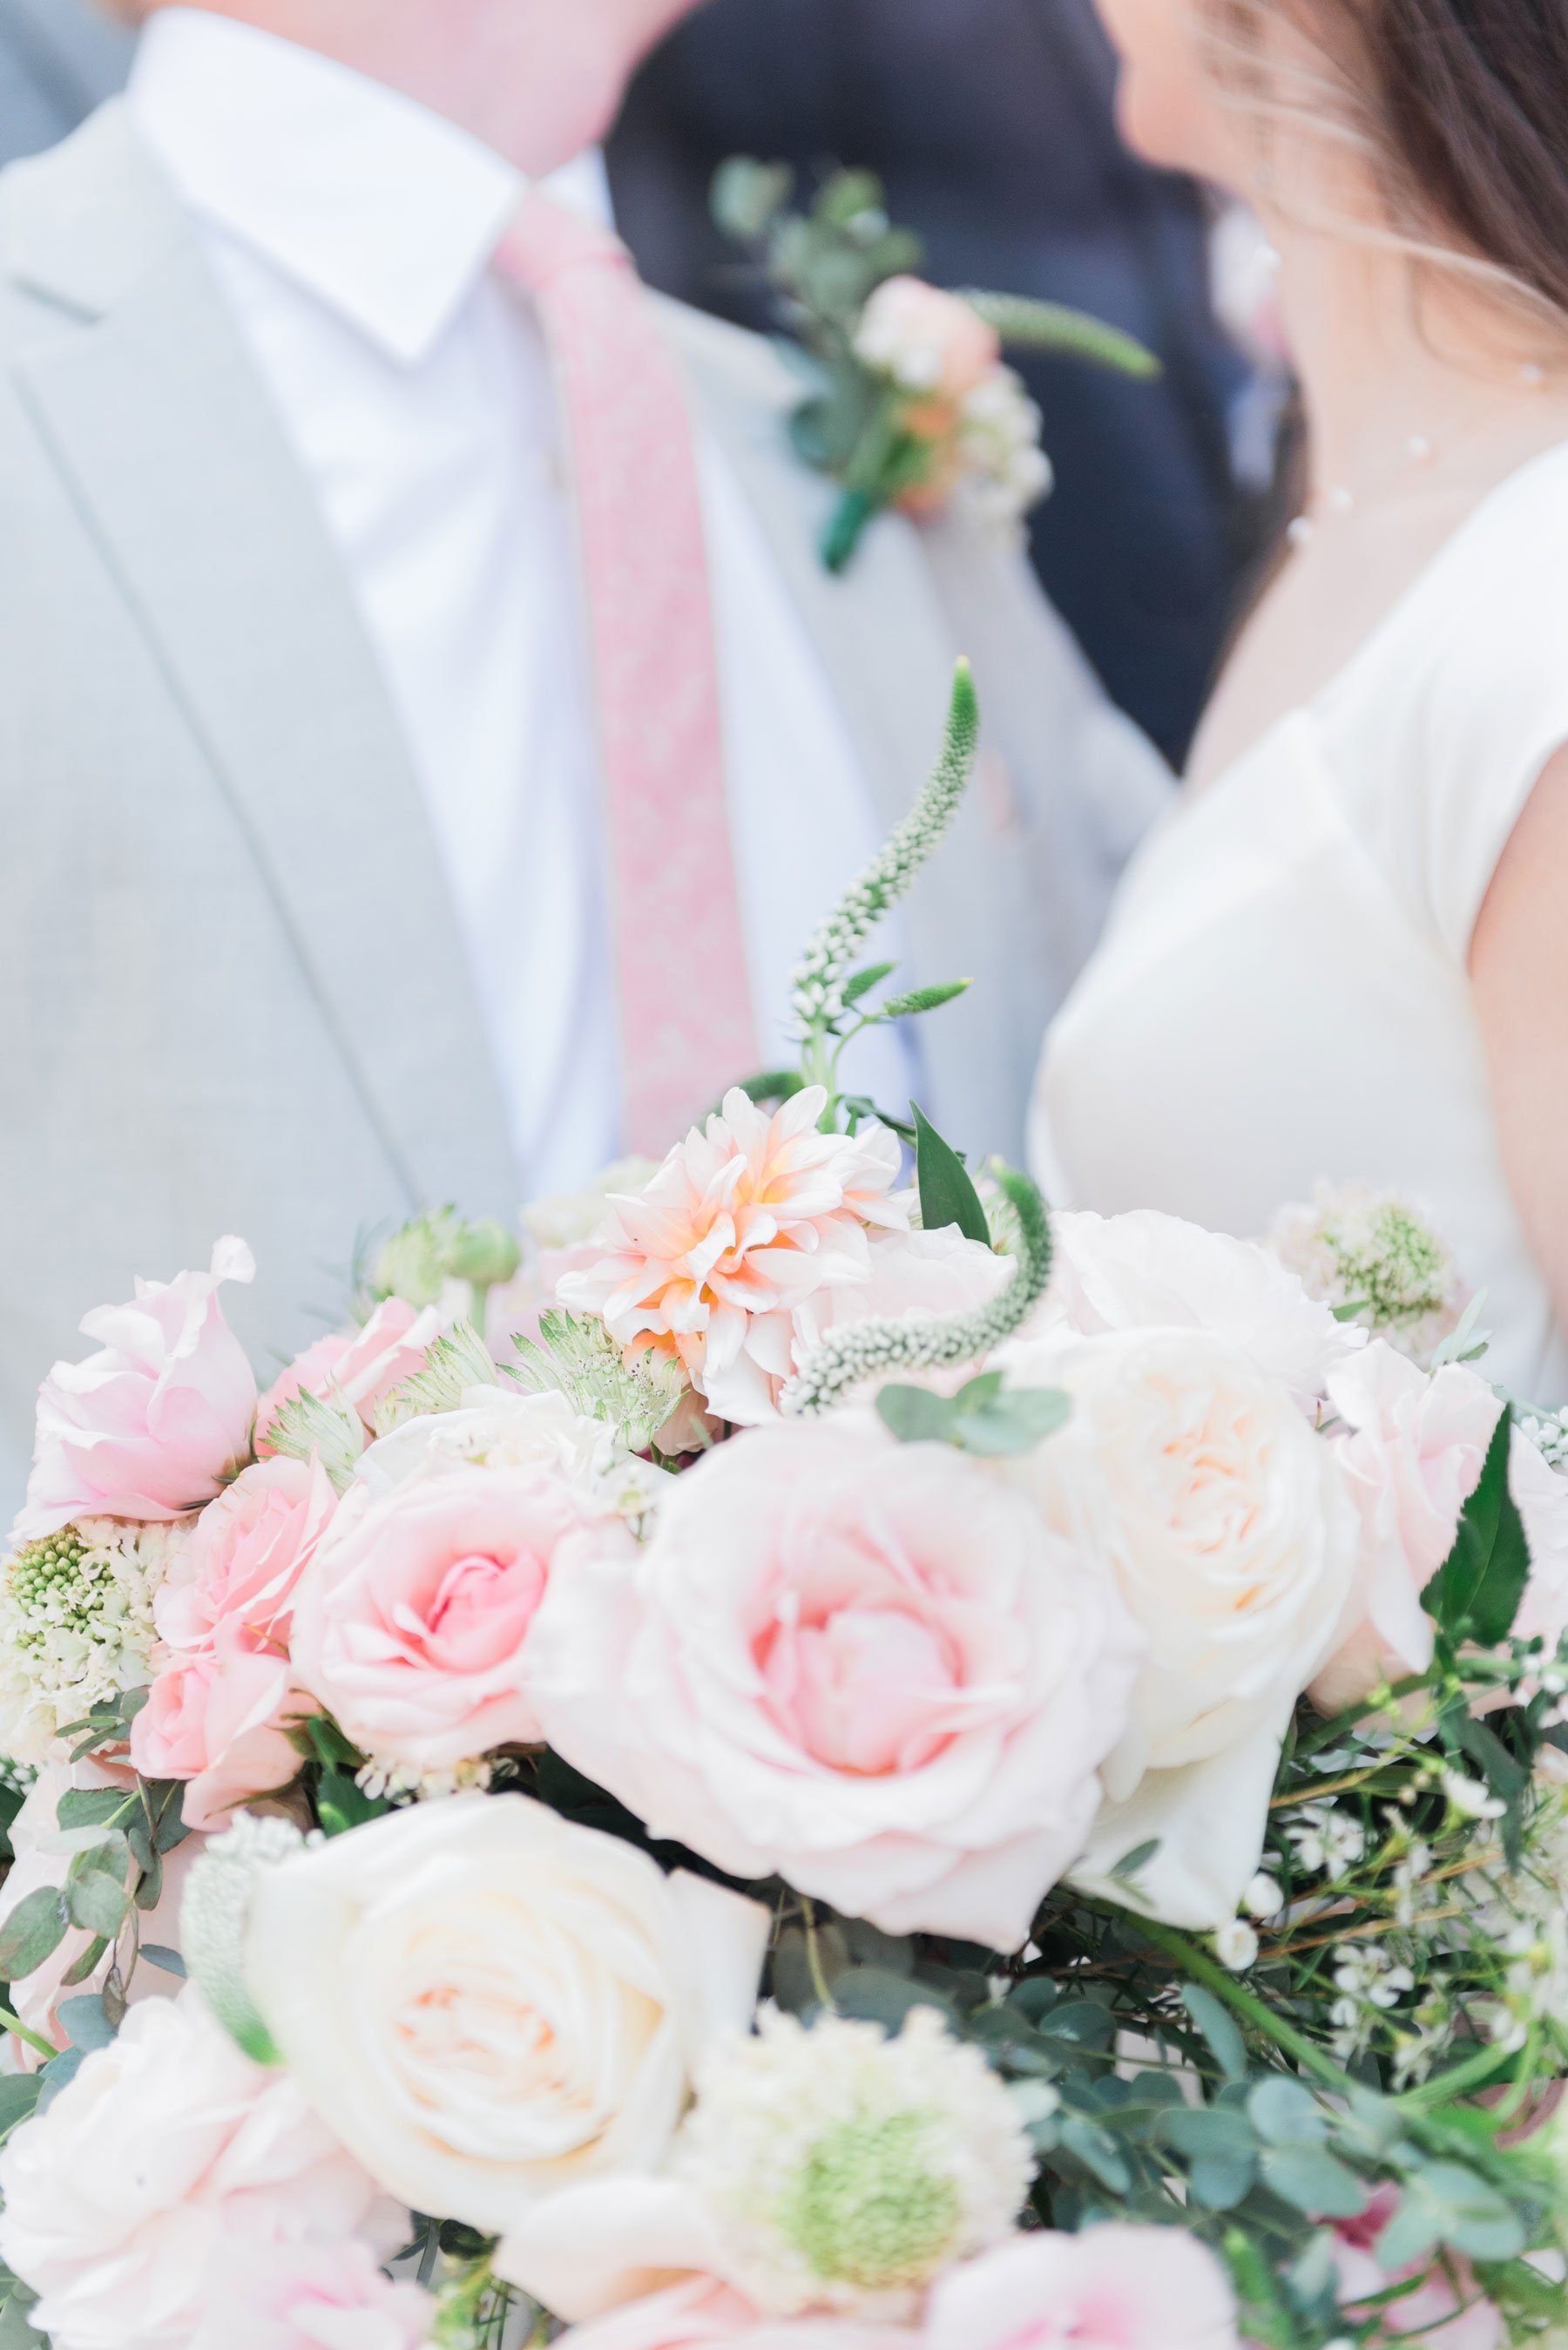    I am in love with the pink roses and beautiful greenery in these blush wedding florals. #washingtondctemple #washingtondcweddingphotographer #dcwedding #pinkwedding #ldsweddingphotographer #pinkweddingbouquet #washingtondctempleexit #eastcoastwedd